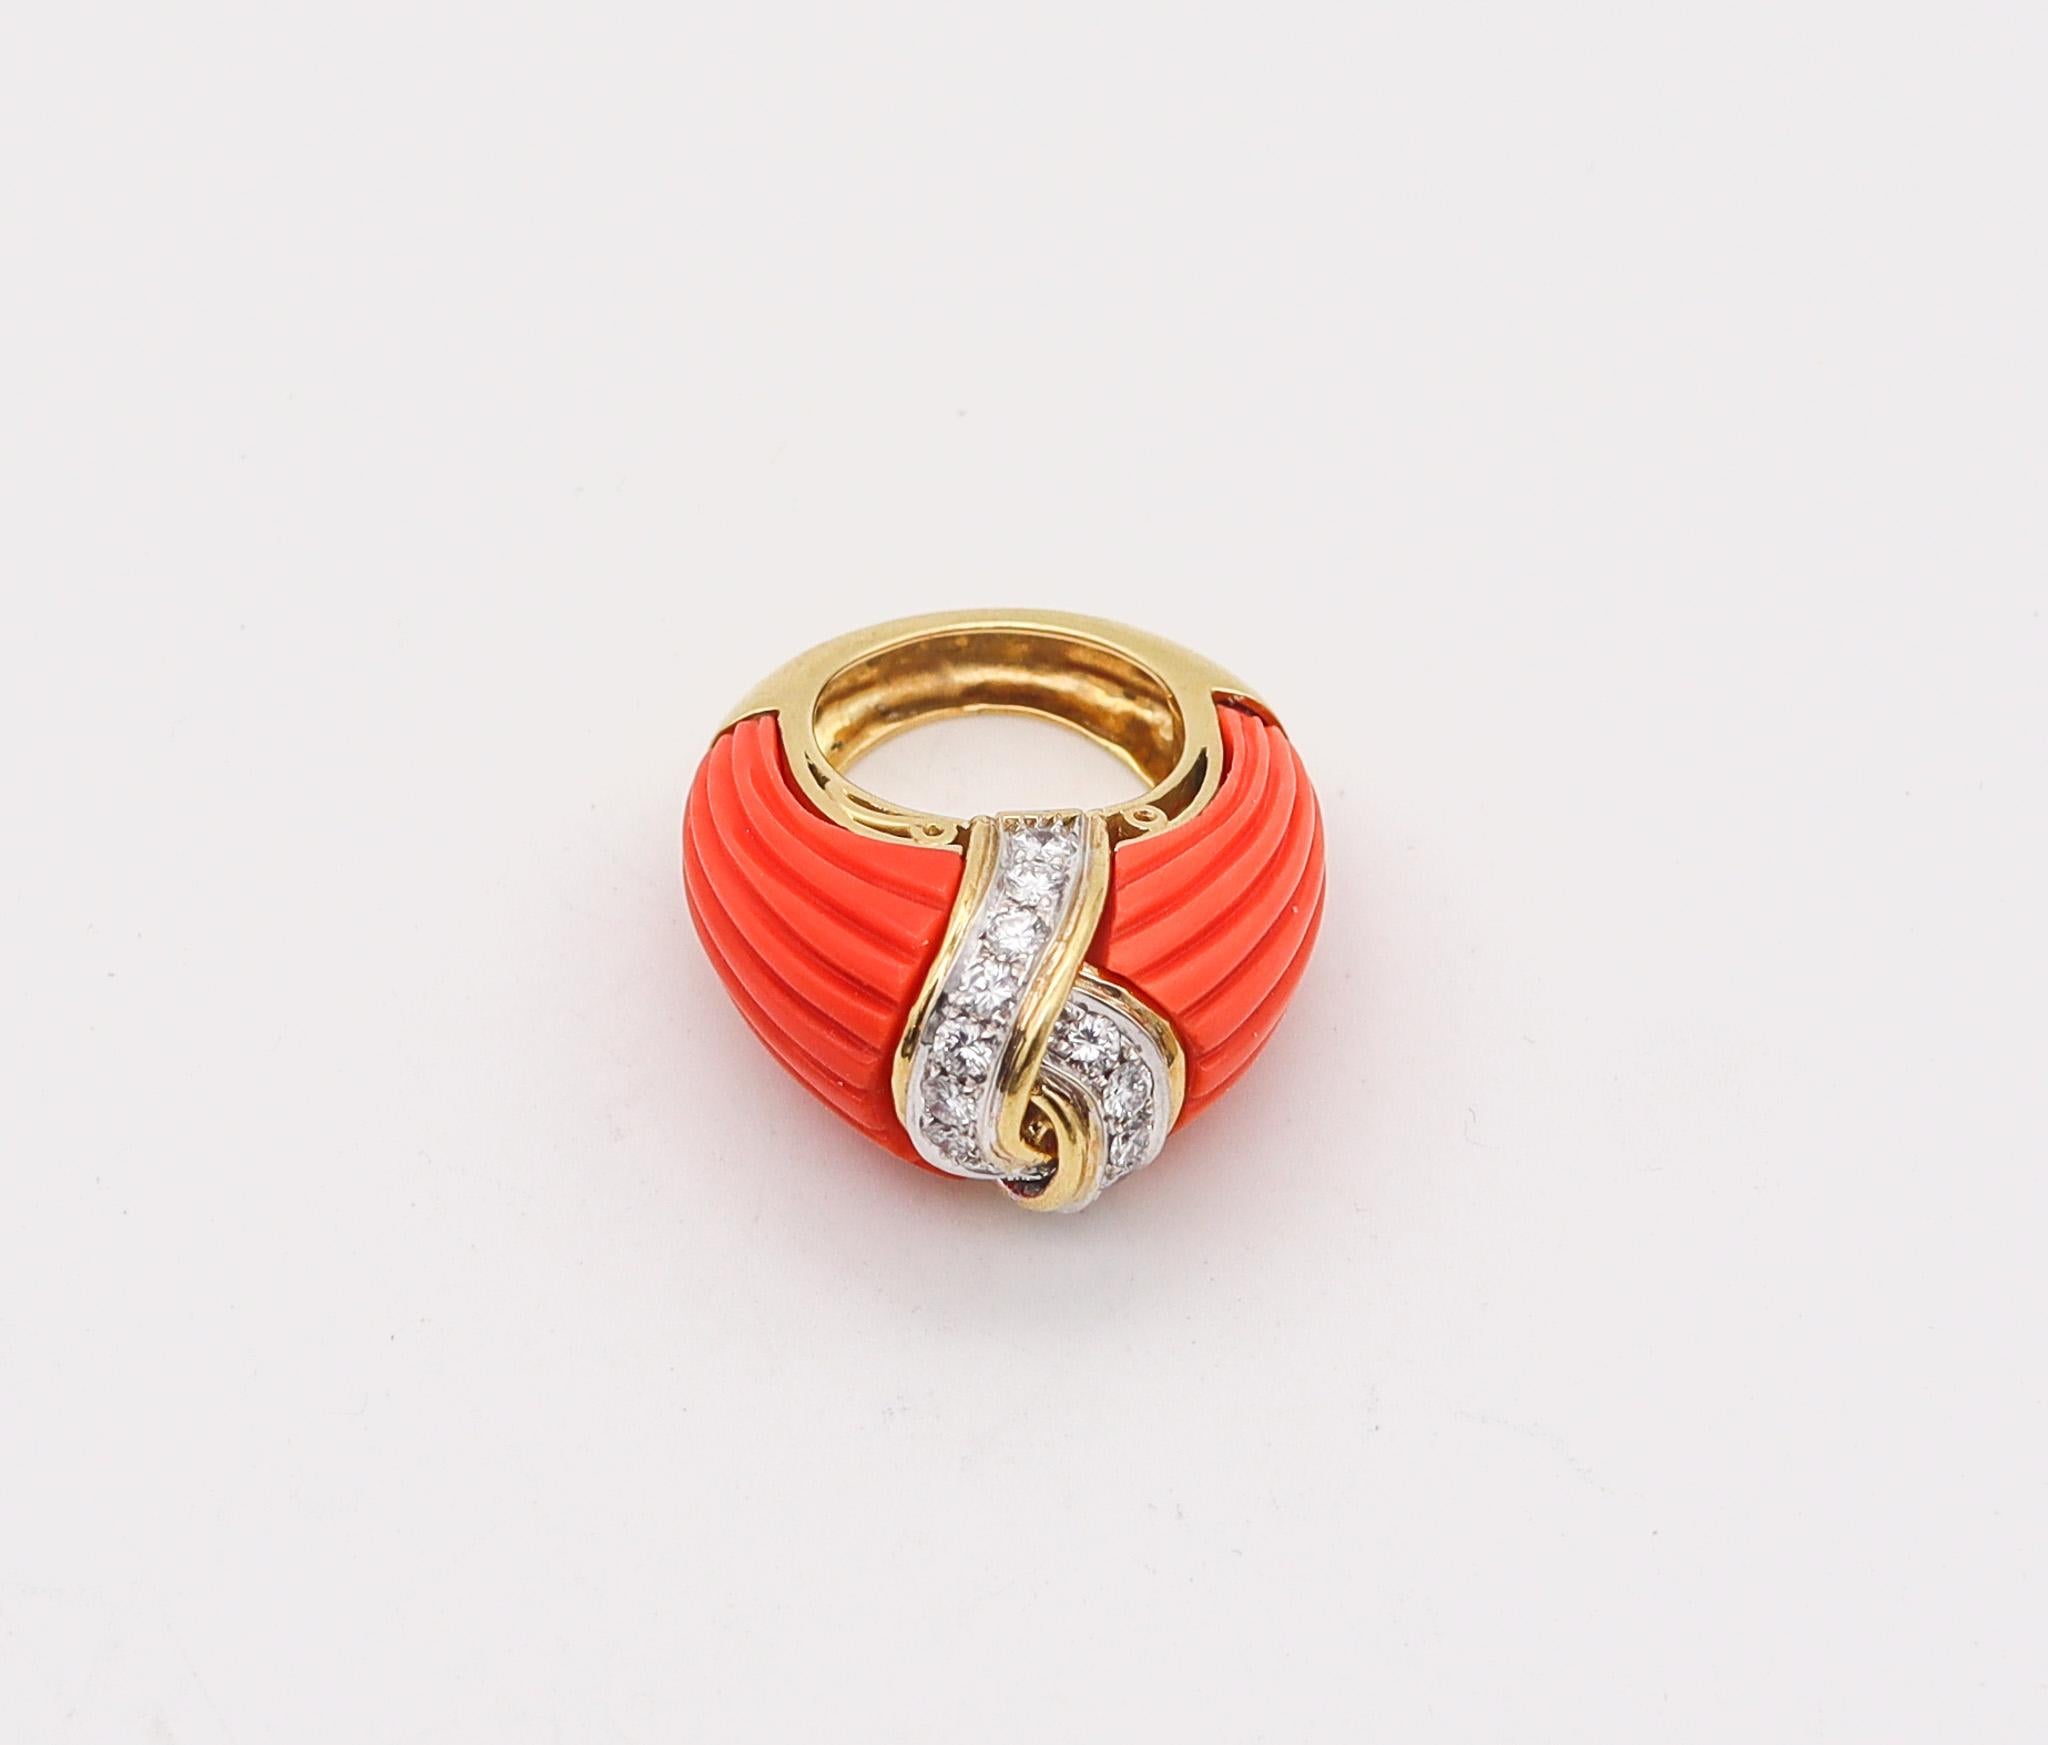 Italian 1970 Modernist Cocktail Ring 18Kt Gold With 21.60 Ctw Diamonds And Coral In Excellent Condition For Sale In Miami, FL